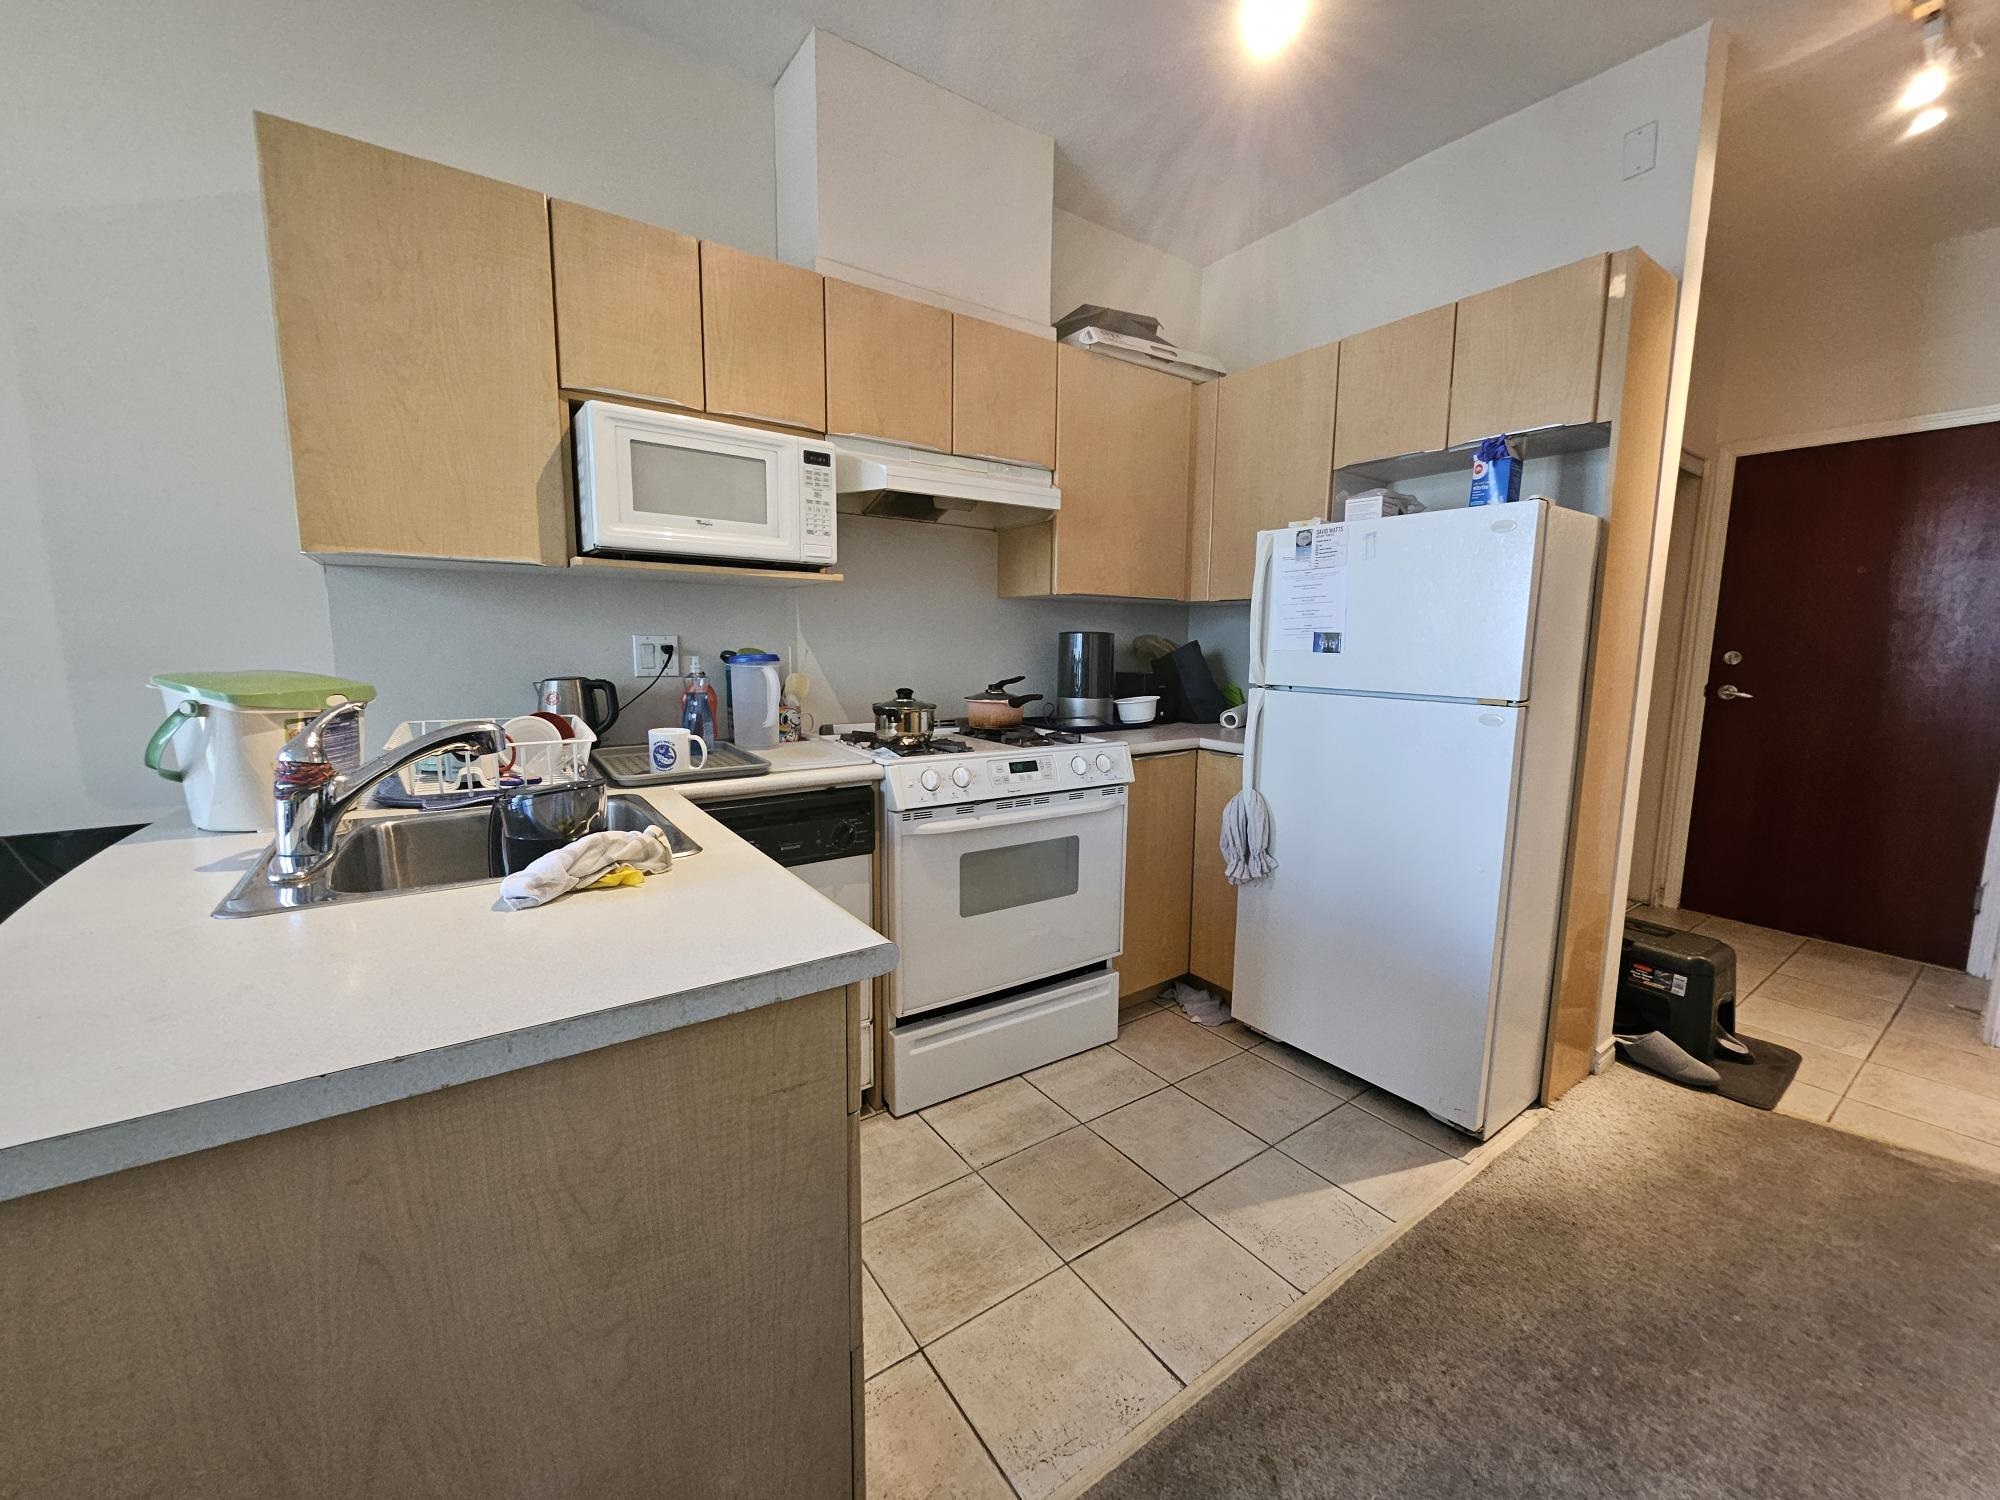 706-1239 WGEORGIA STREET, Vancouver, British Columbia, ,1 BathroomBathrooms,Residential Attached,For Sale,R2869560